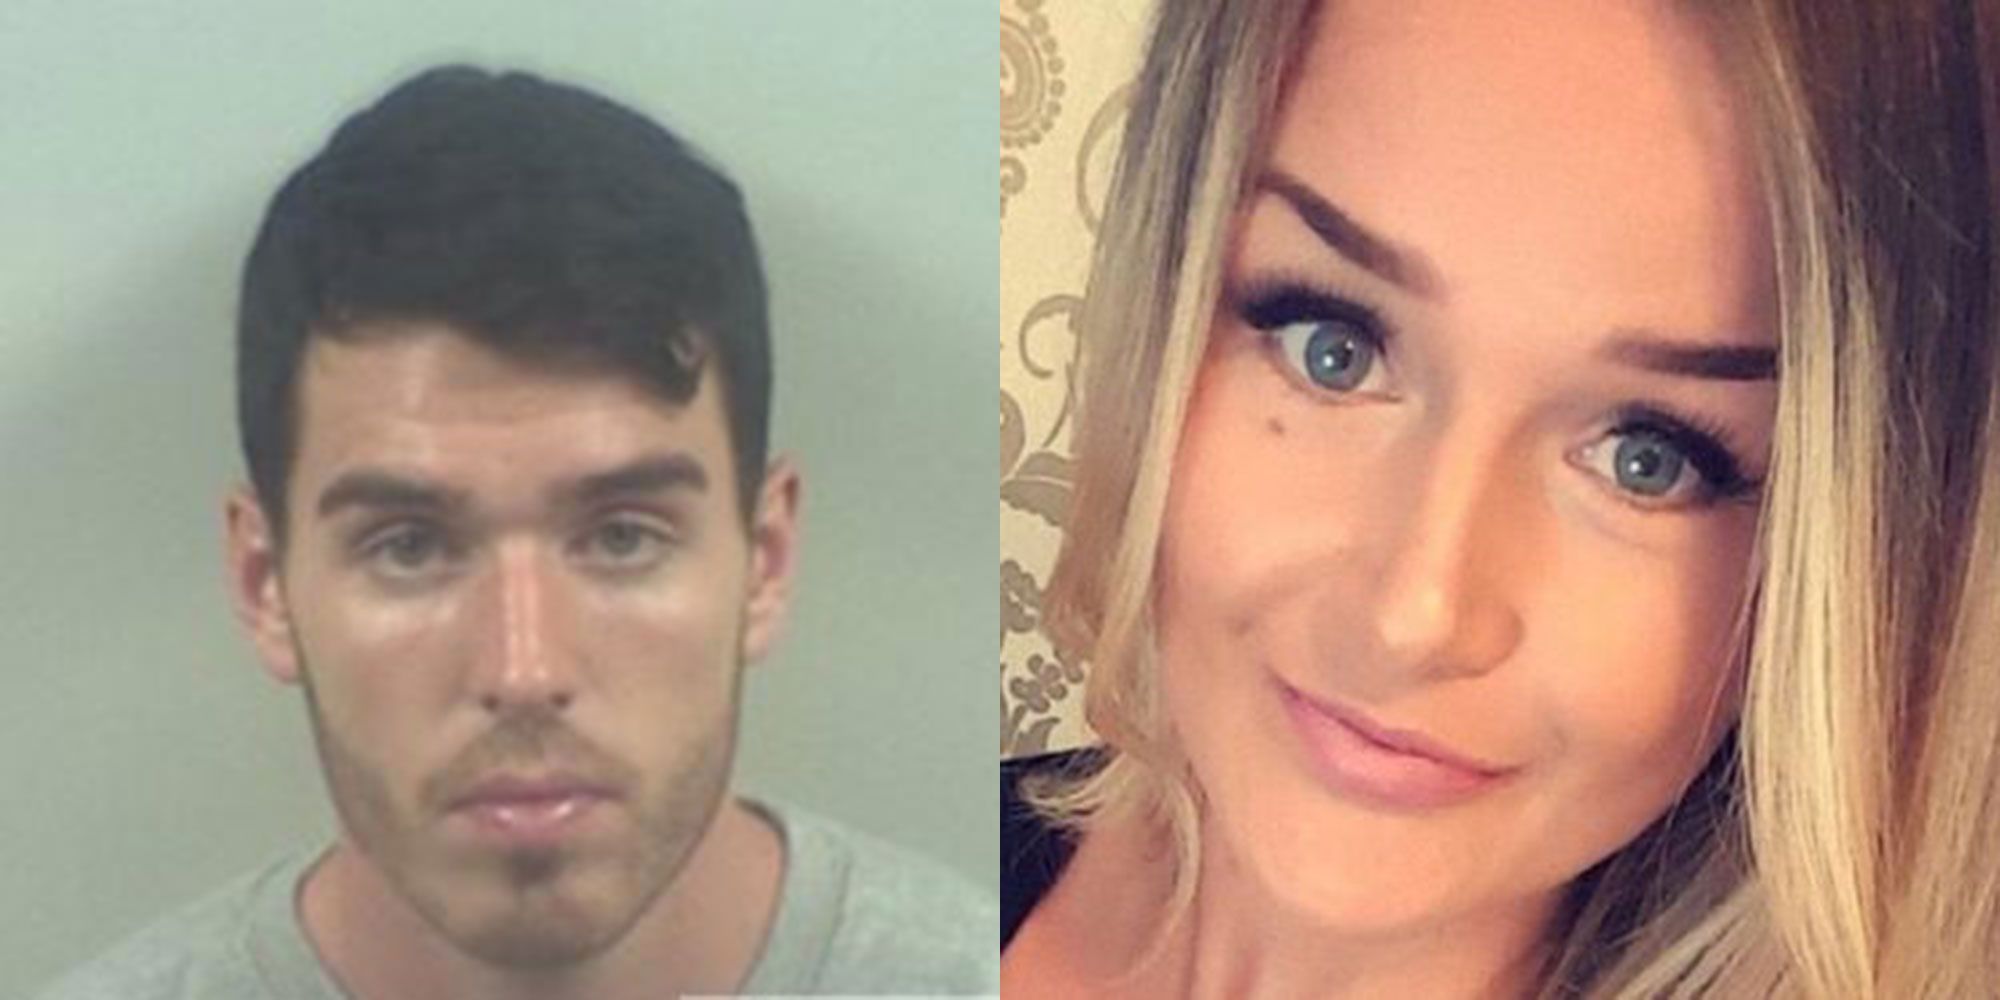 Man stabbed his girlfriend 75 times after she broke up with him